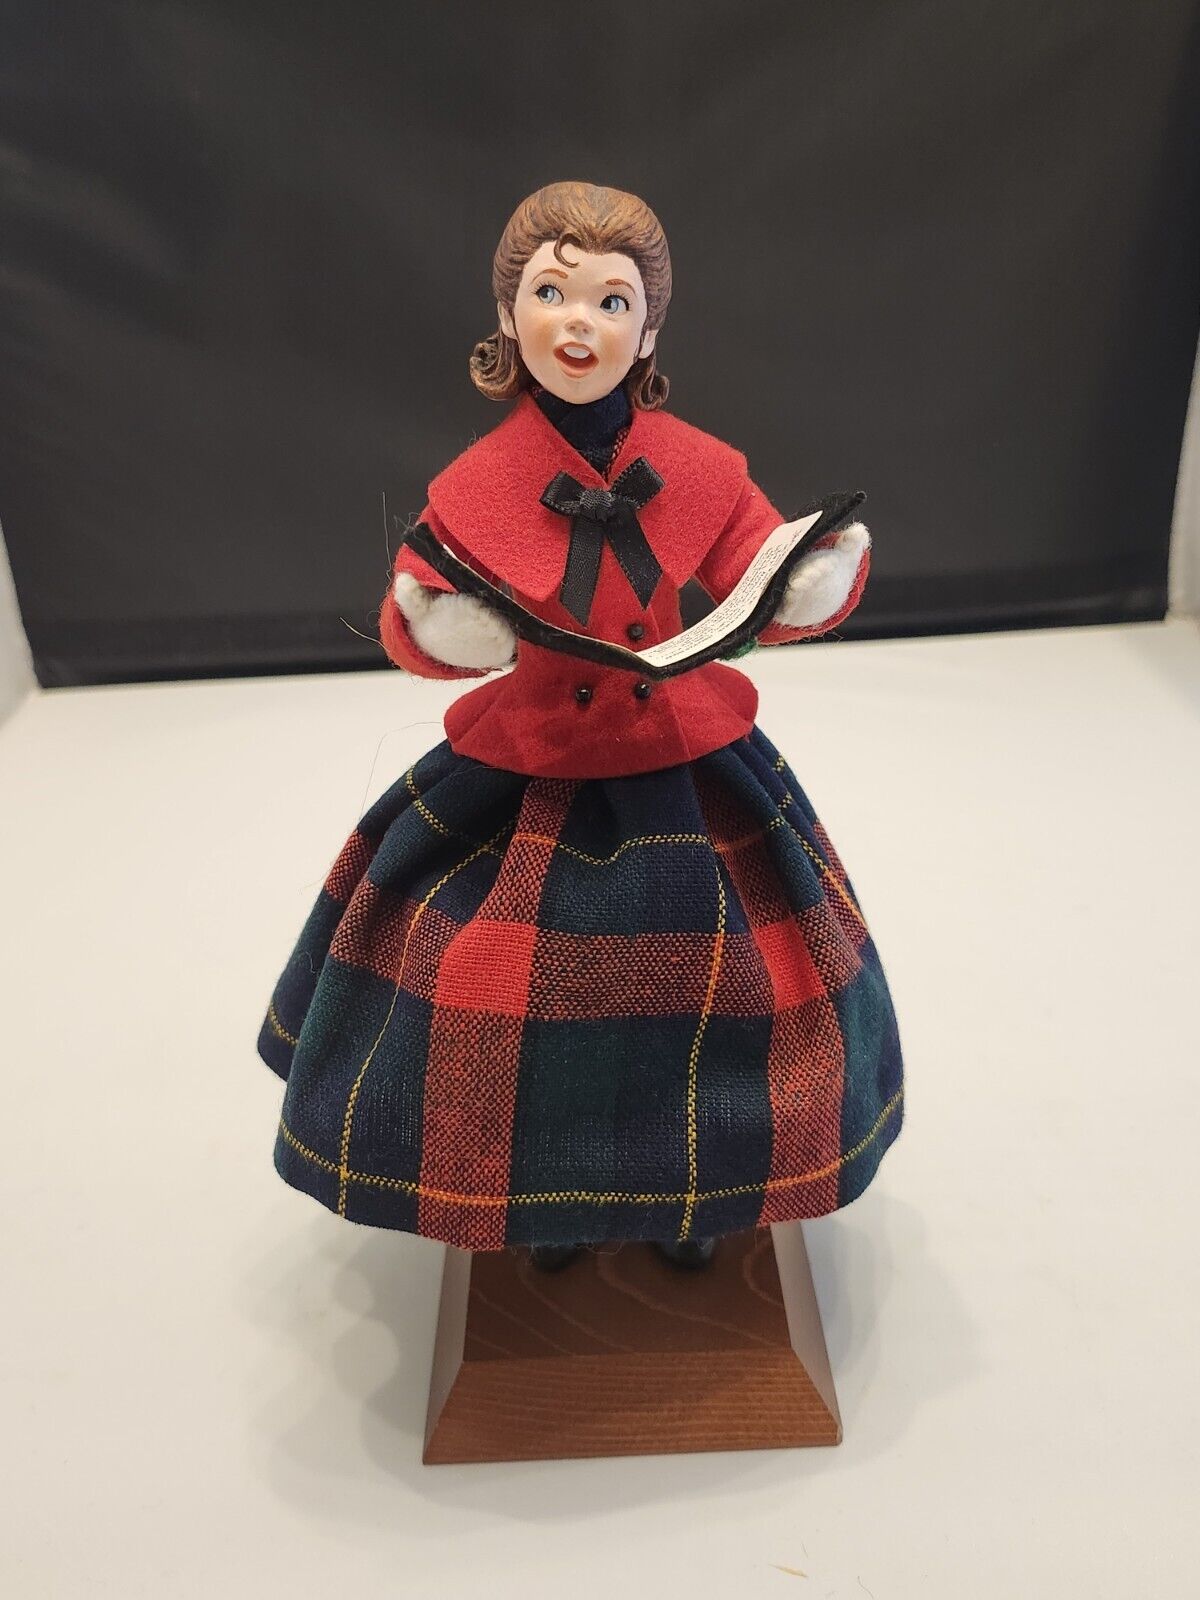 1996 Simpich Character Doll Lady Caroler Red Plaid Skirt Red Jacket Brunette